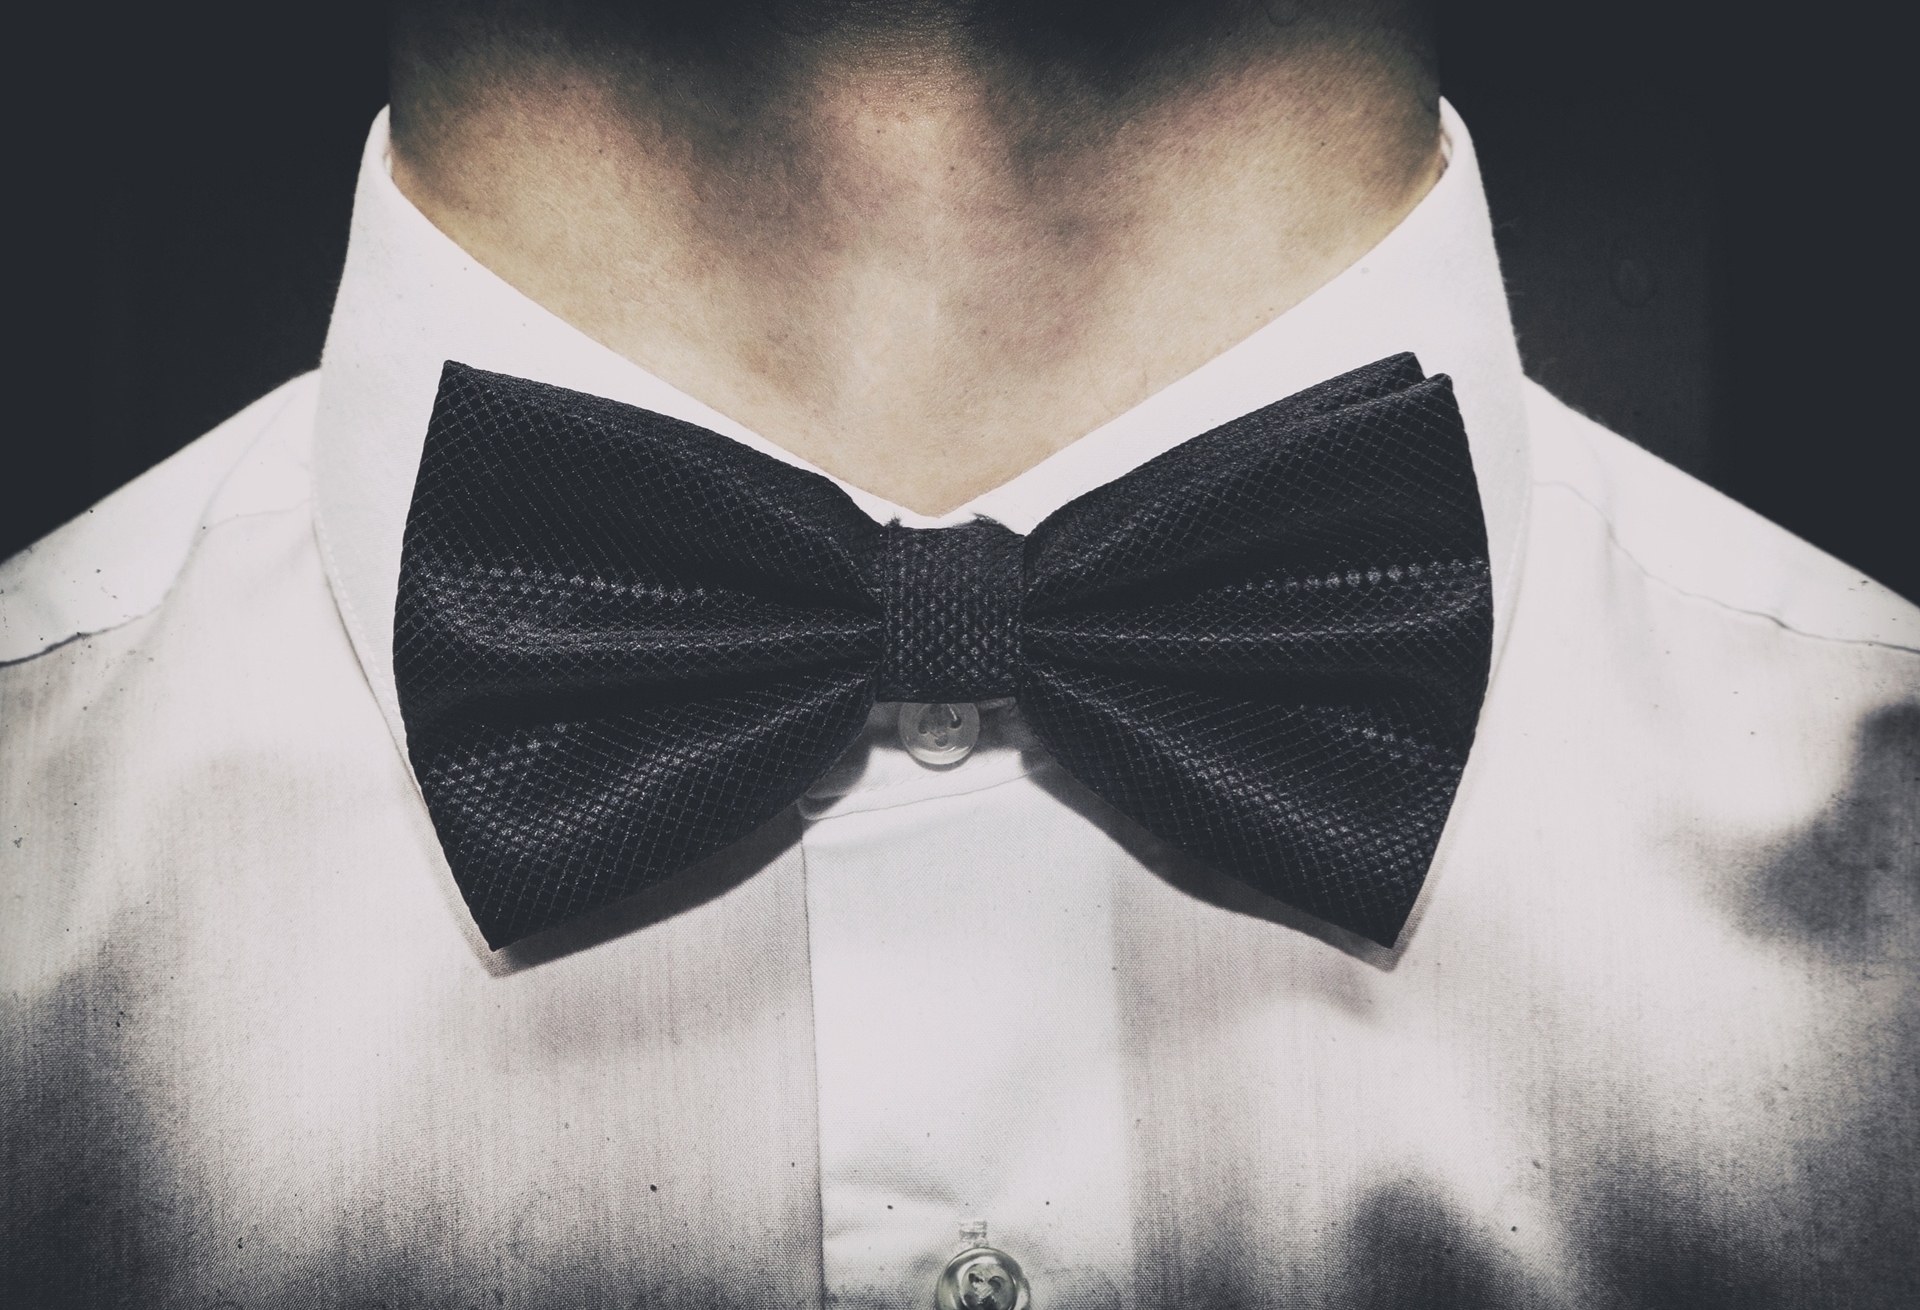 Black Tie. Click to learn more about the color.